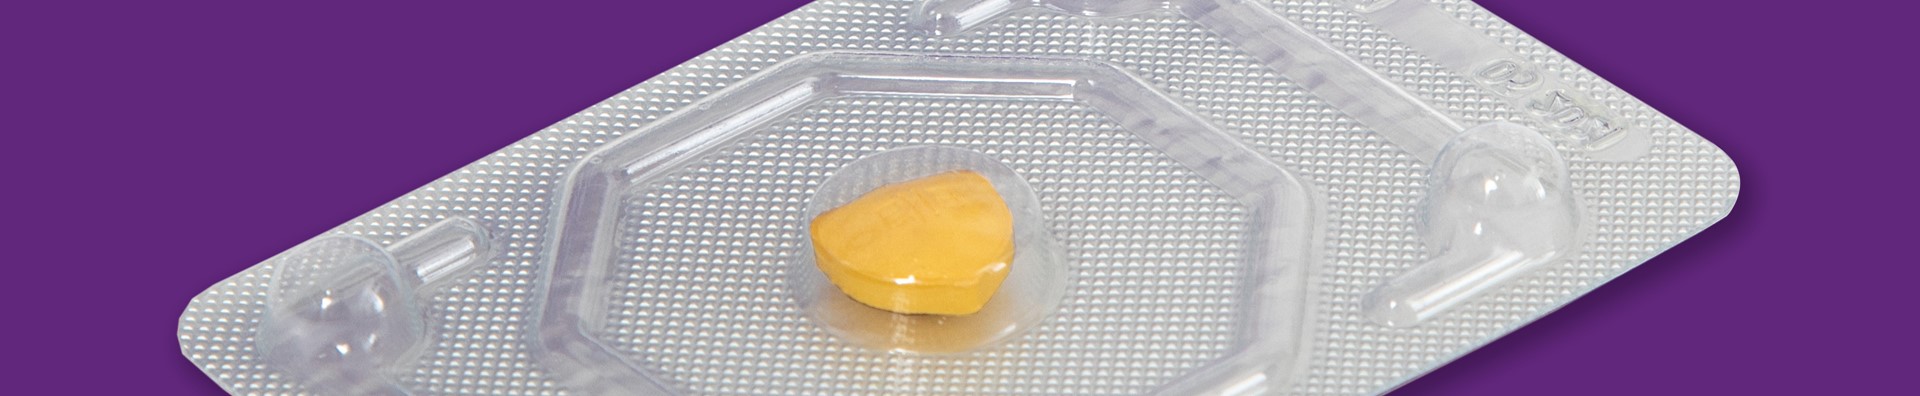 Photo of a single pill in a packet on a purple background